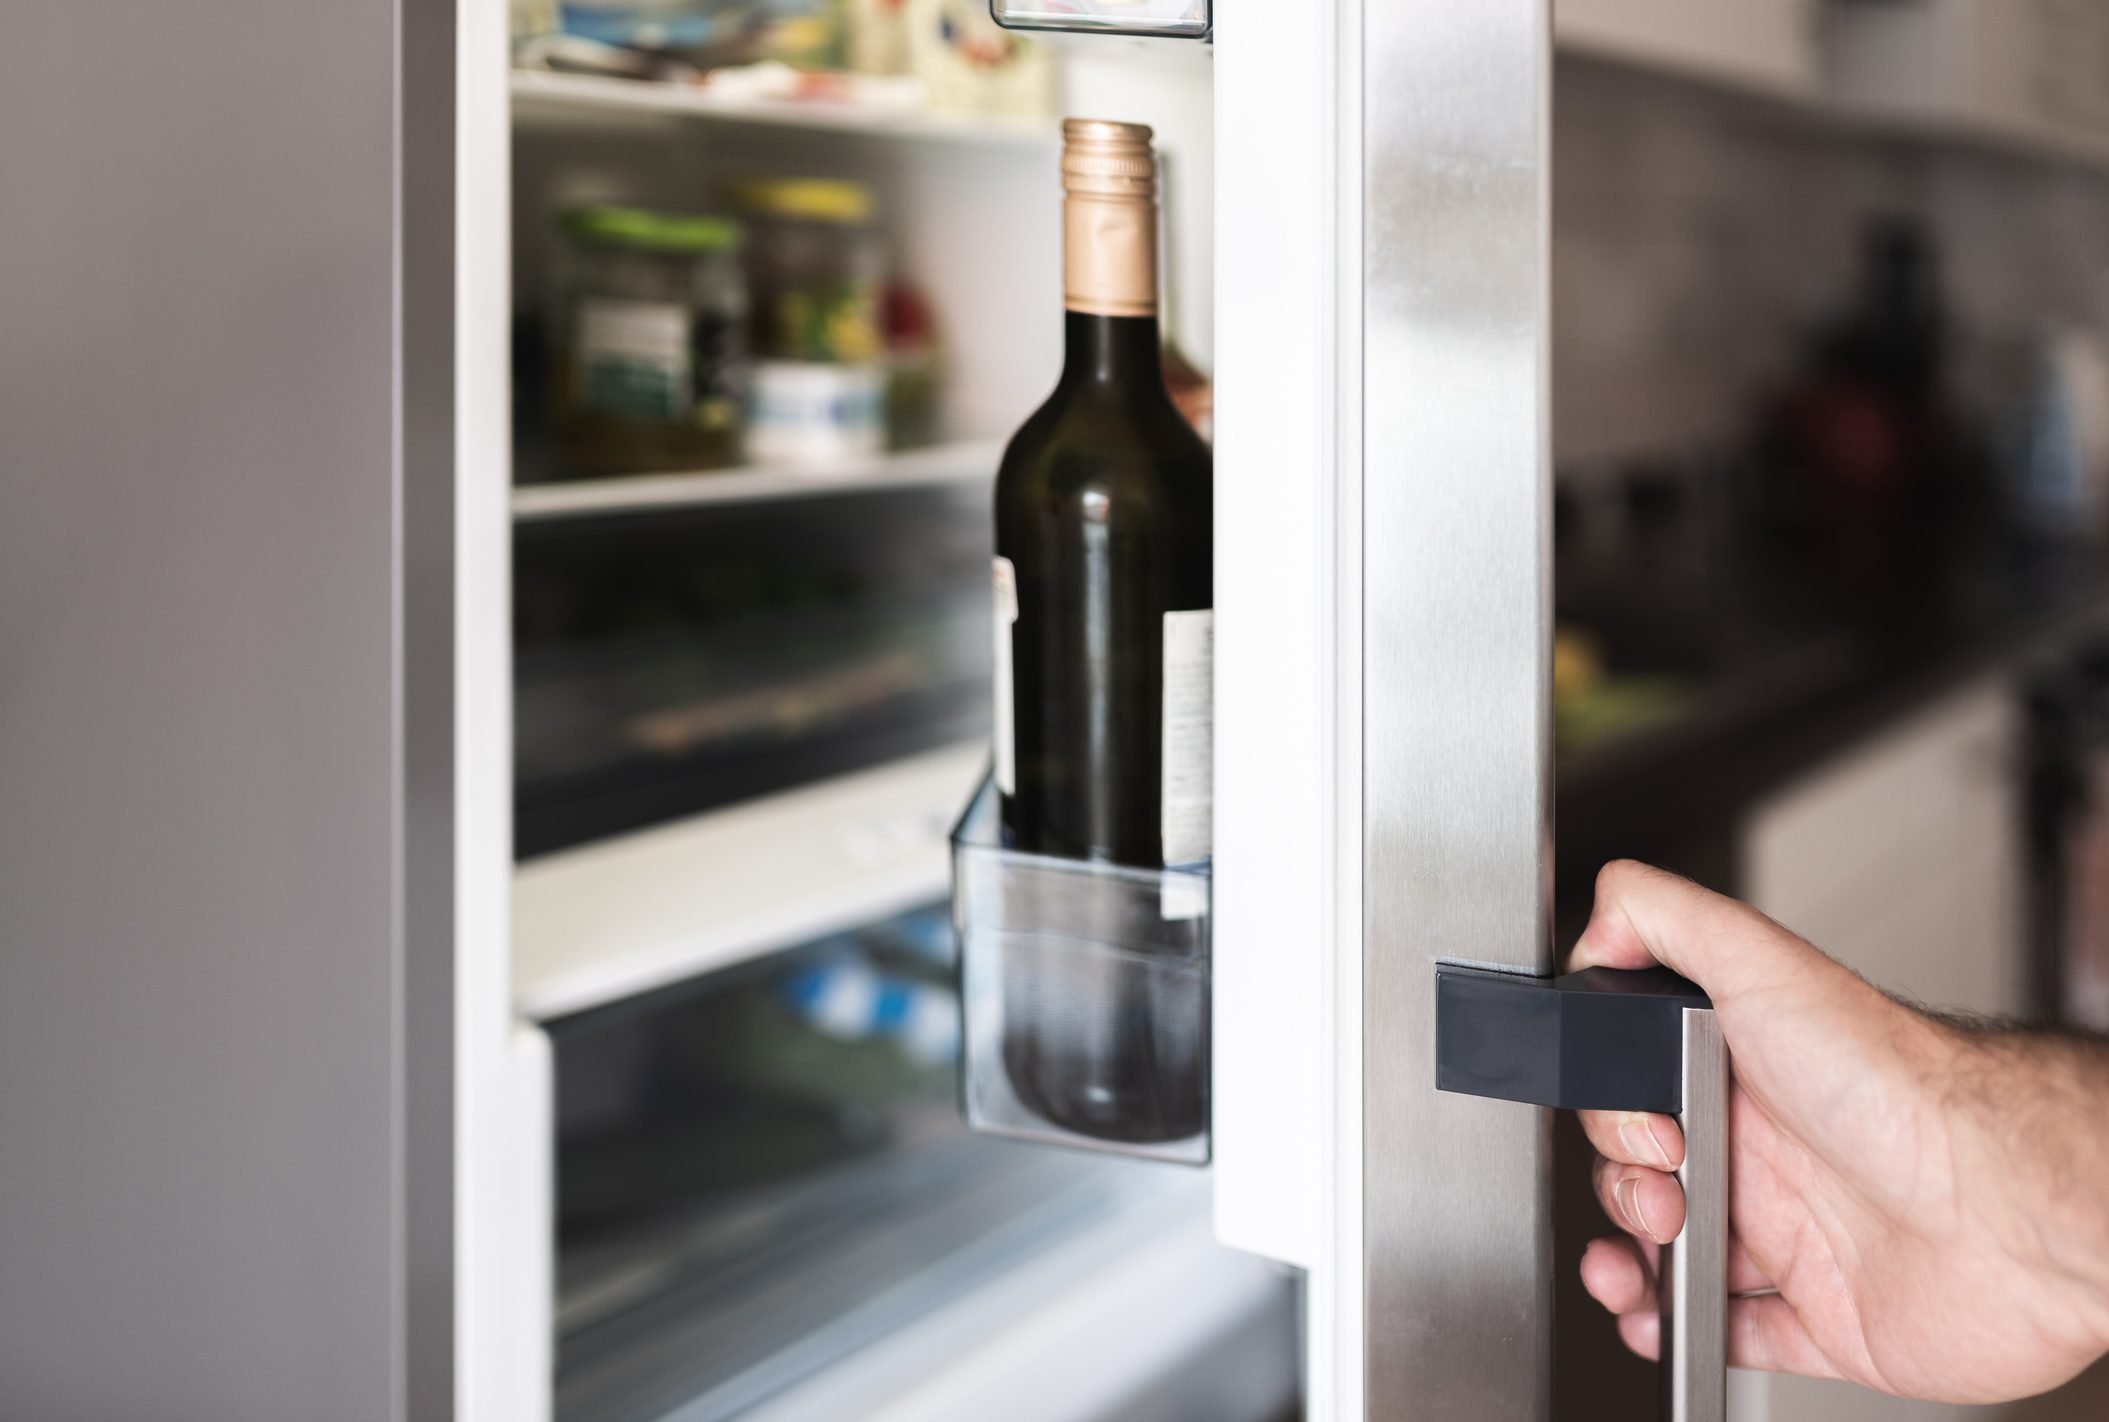 16 Foods You Should Never Keep in the Fridge